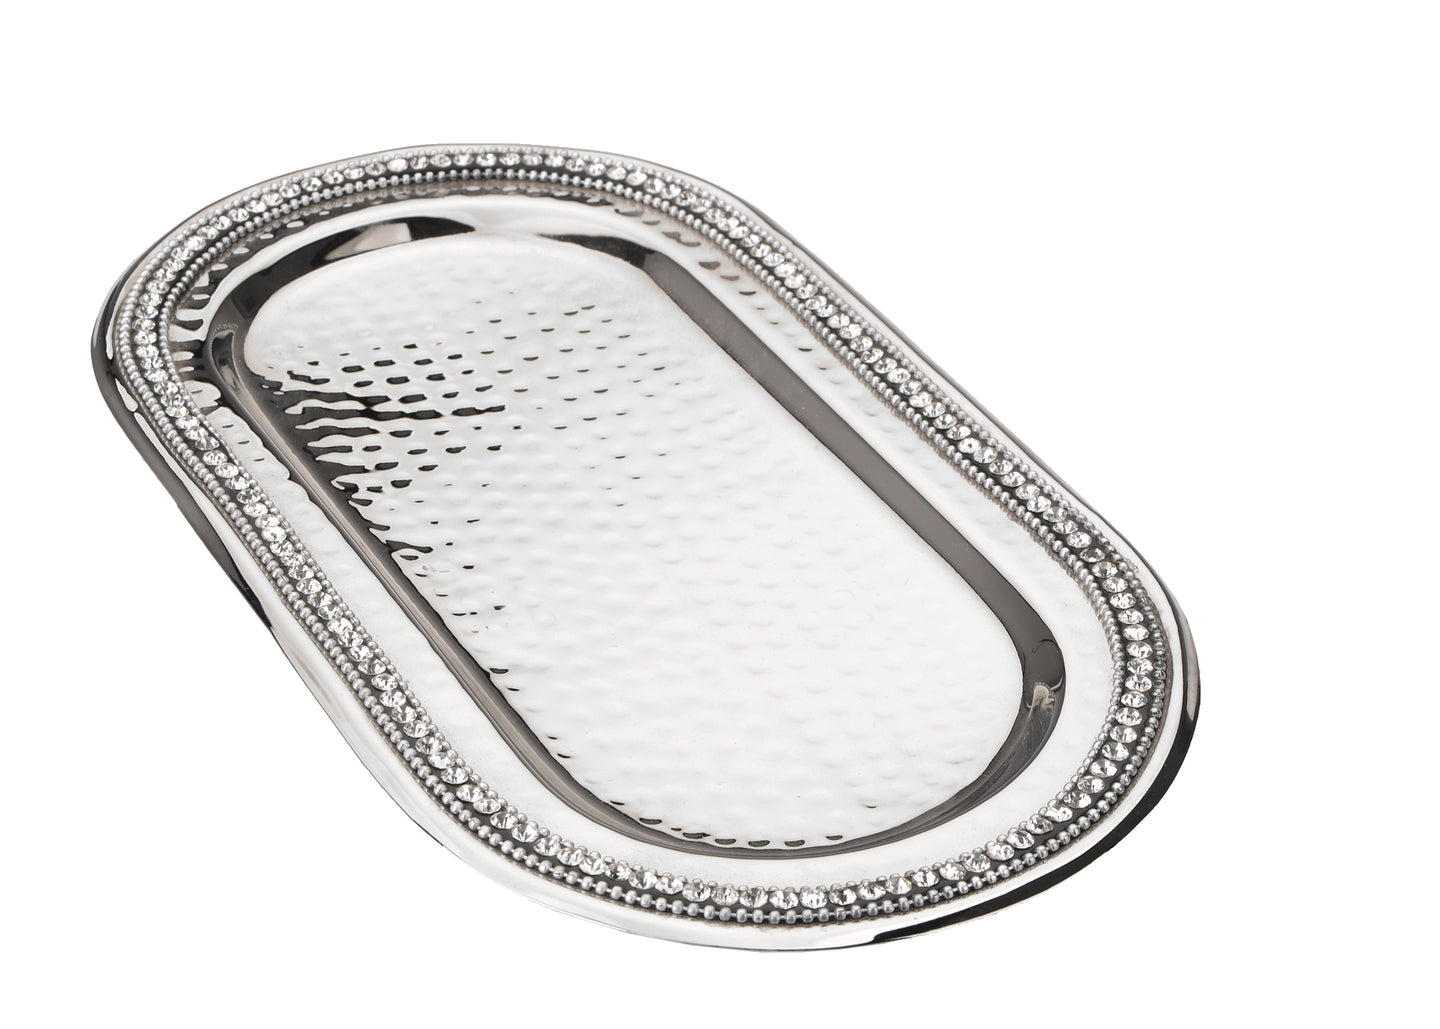 Stainless Steel Oval Tray with Stones